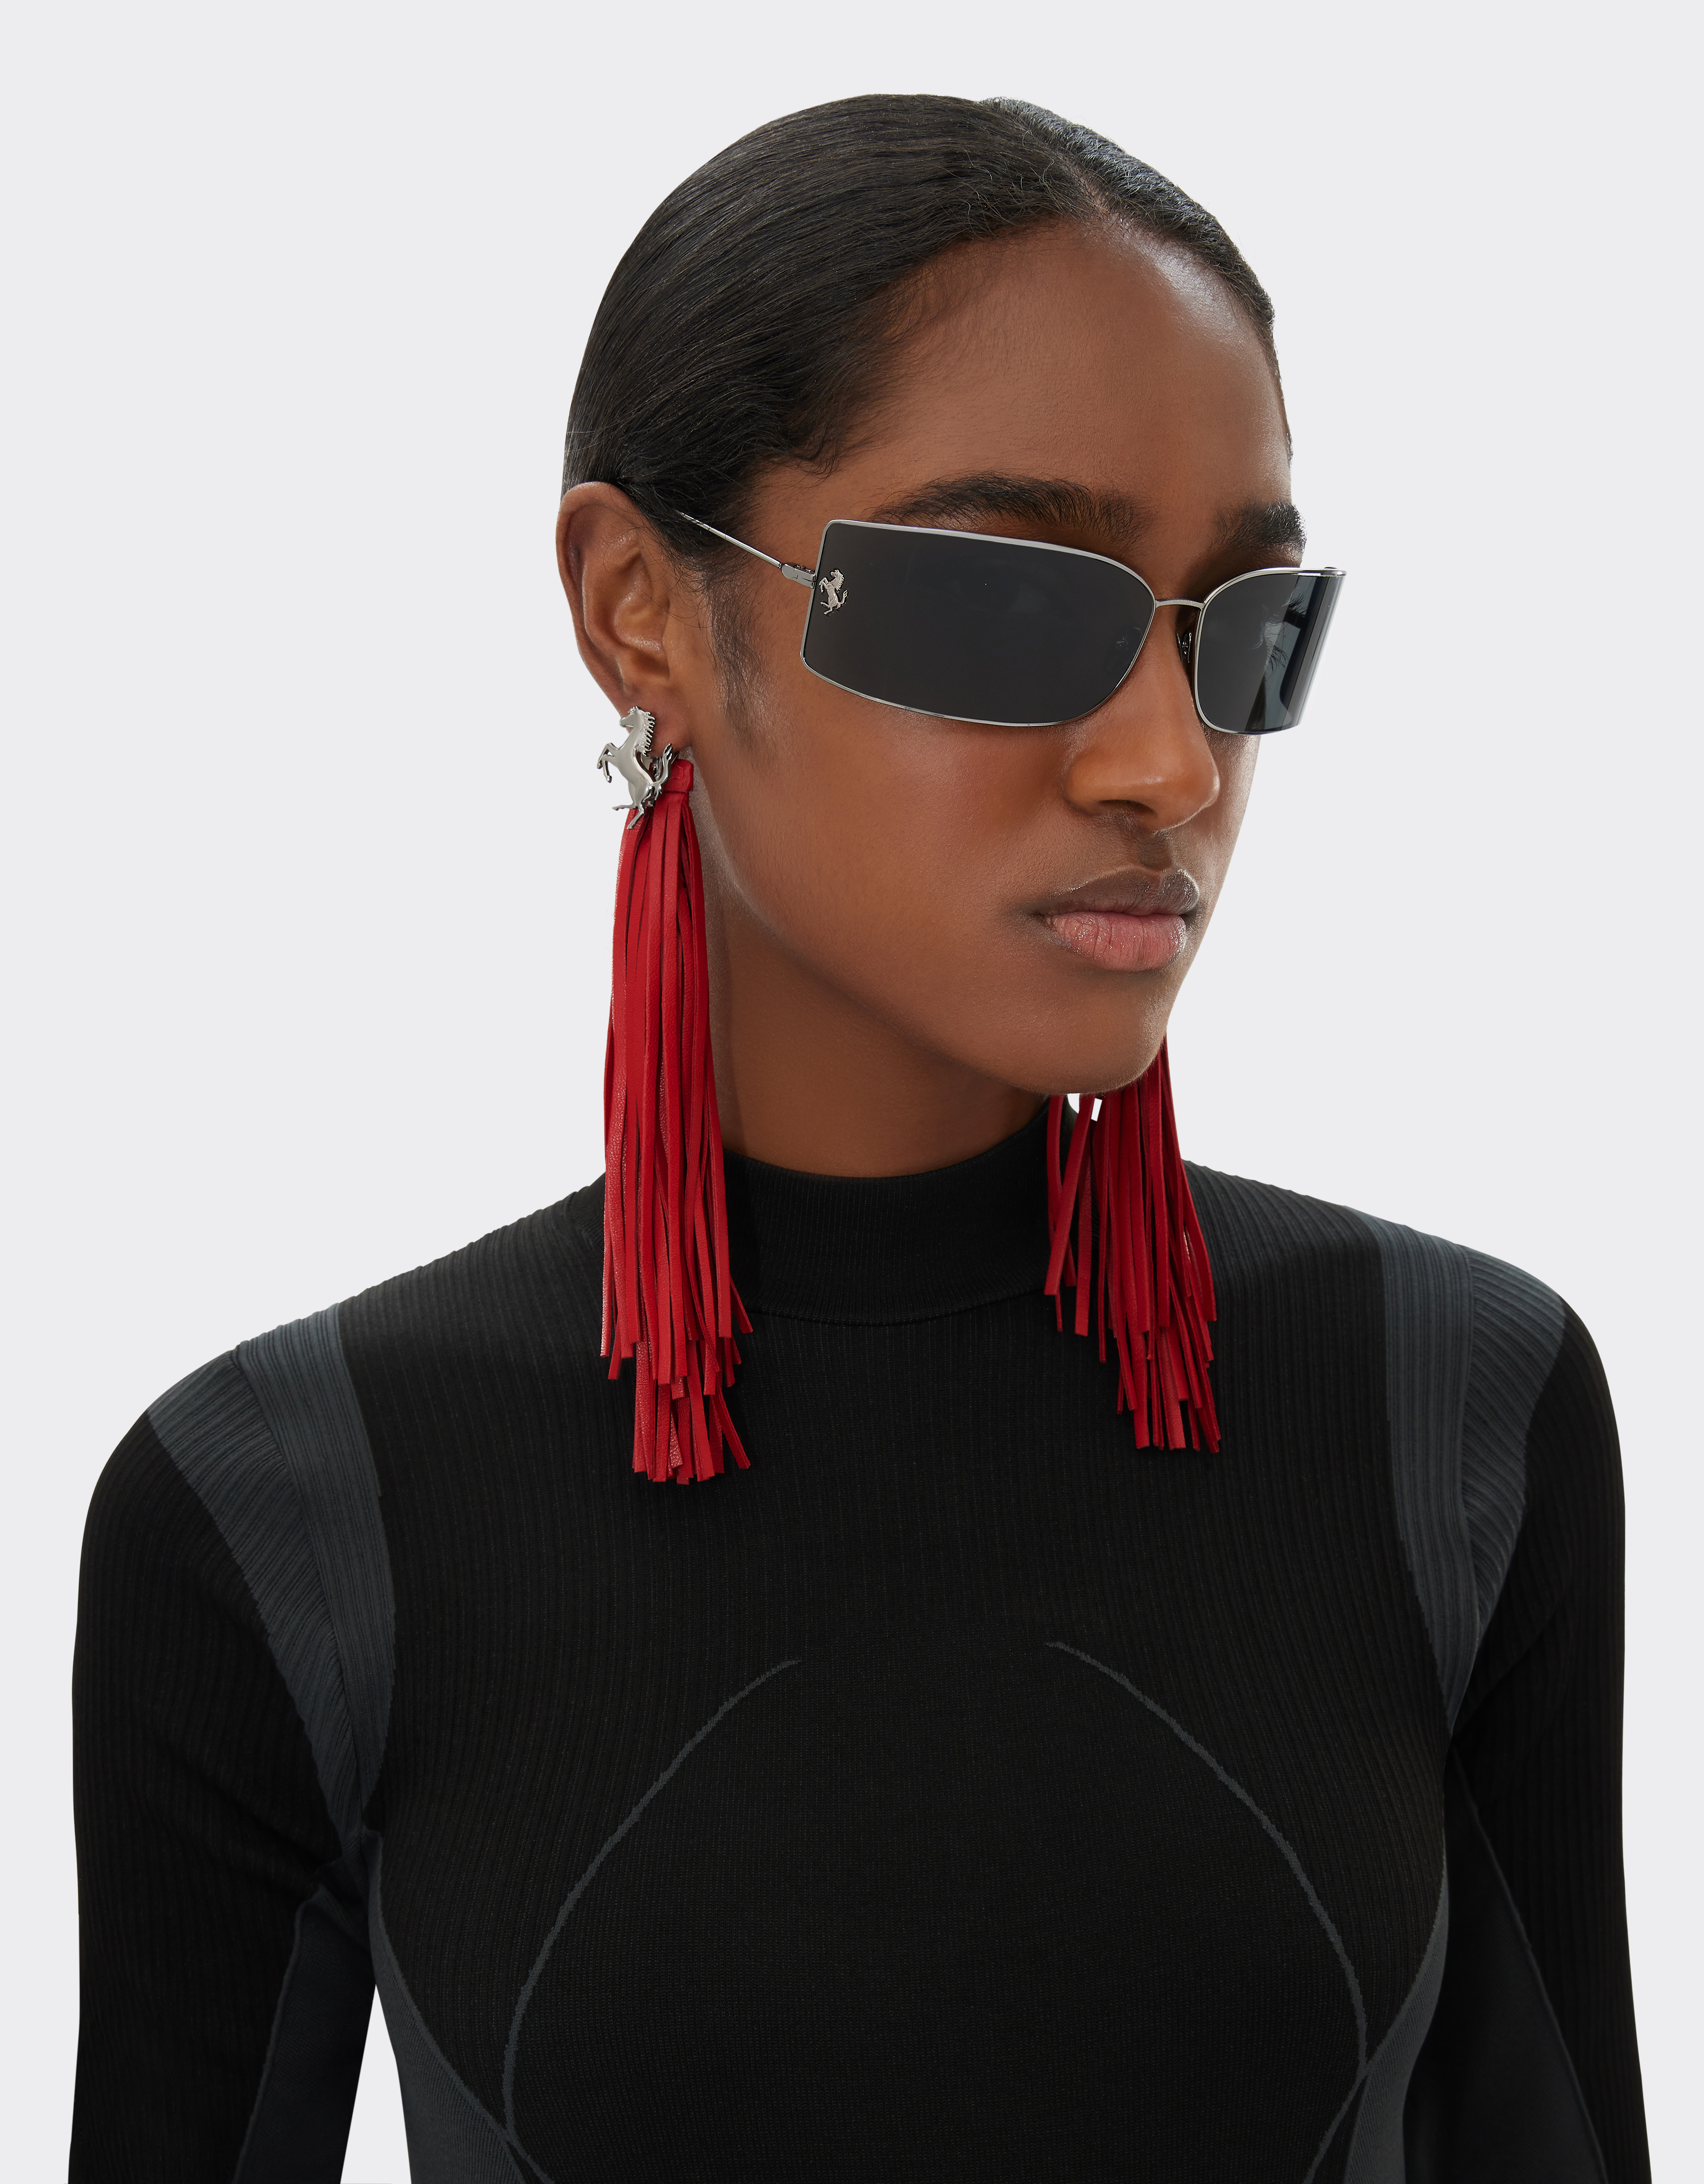 Shop Ferrari Earrings With Prancing Horse Detail And Leather Tassel In Rosso Dino